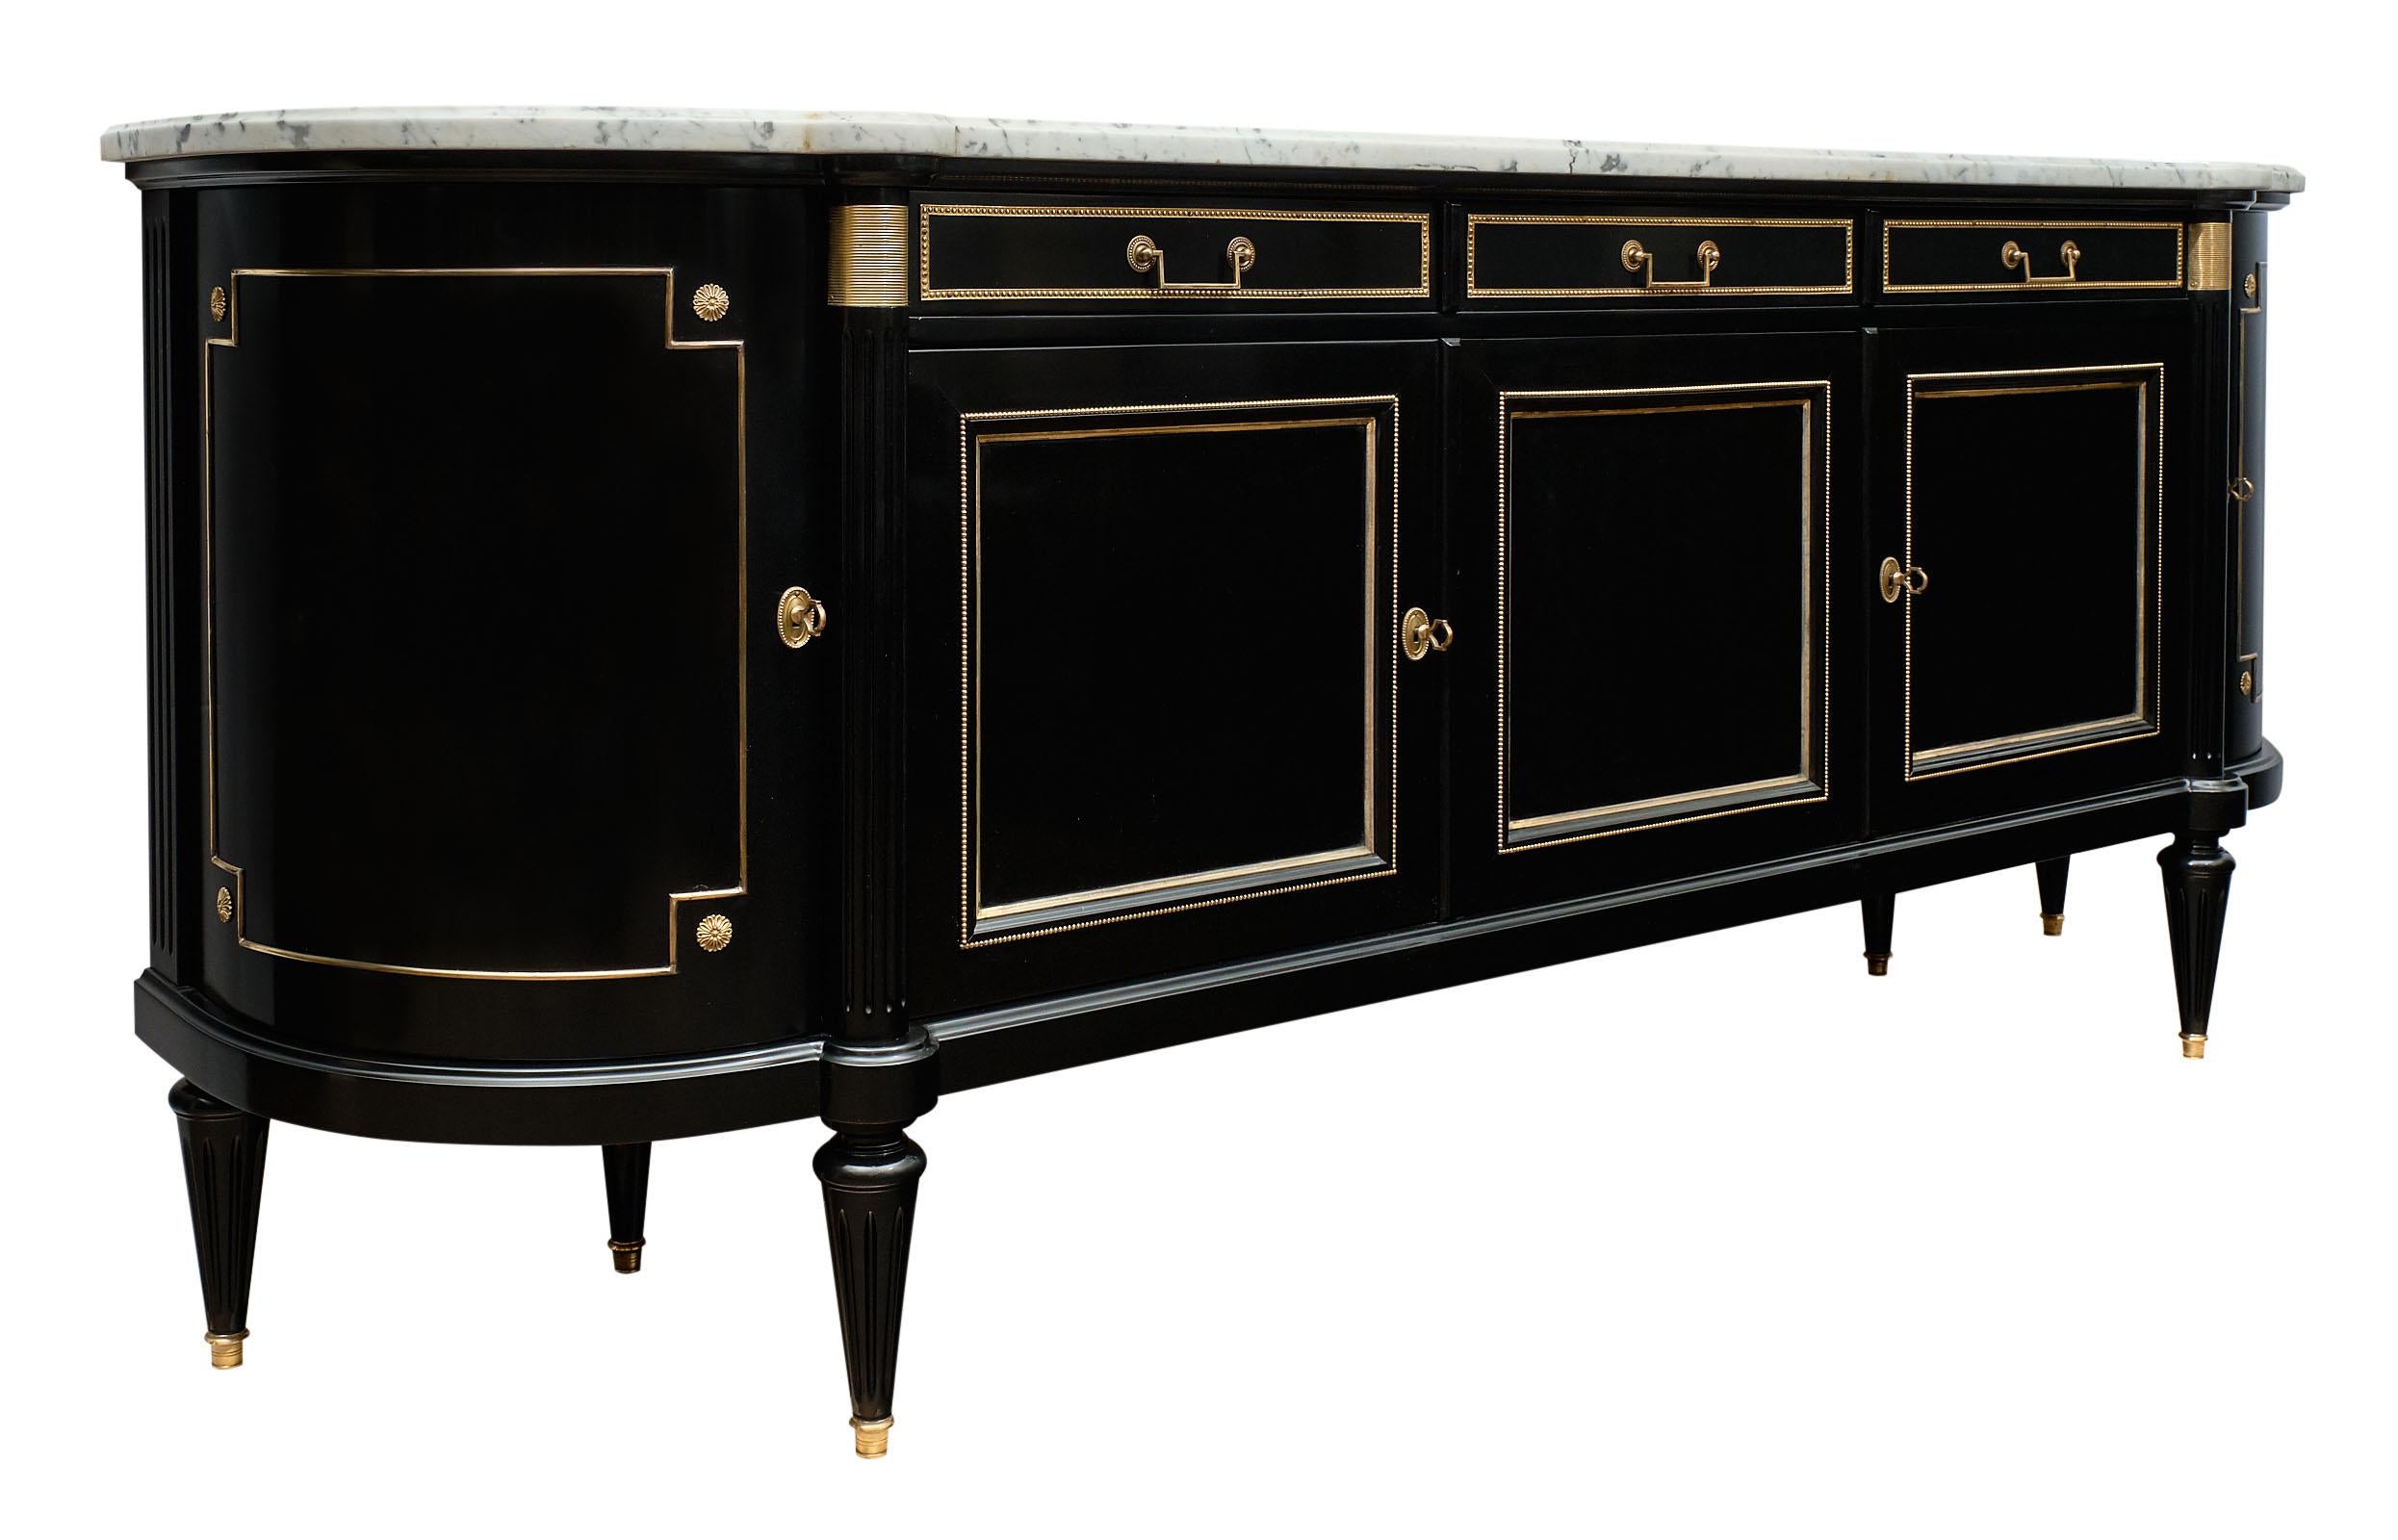 Louis XVI style French antique curved buffet made of mahogany that has a lustrous; Museum quality ebonized French polish finish. The gilt brass trim and hardware throughout contrasts strikingly with the black color and makes an impressive showing.